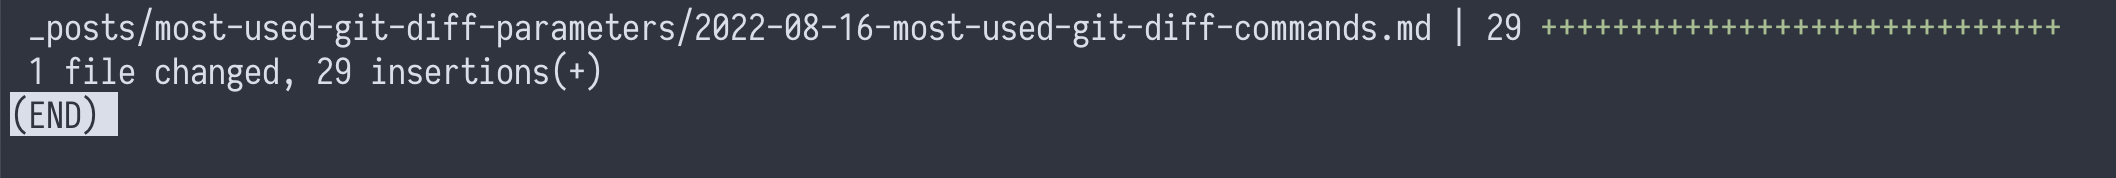 Git diff stat command output